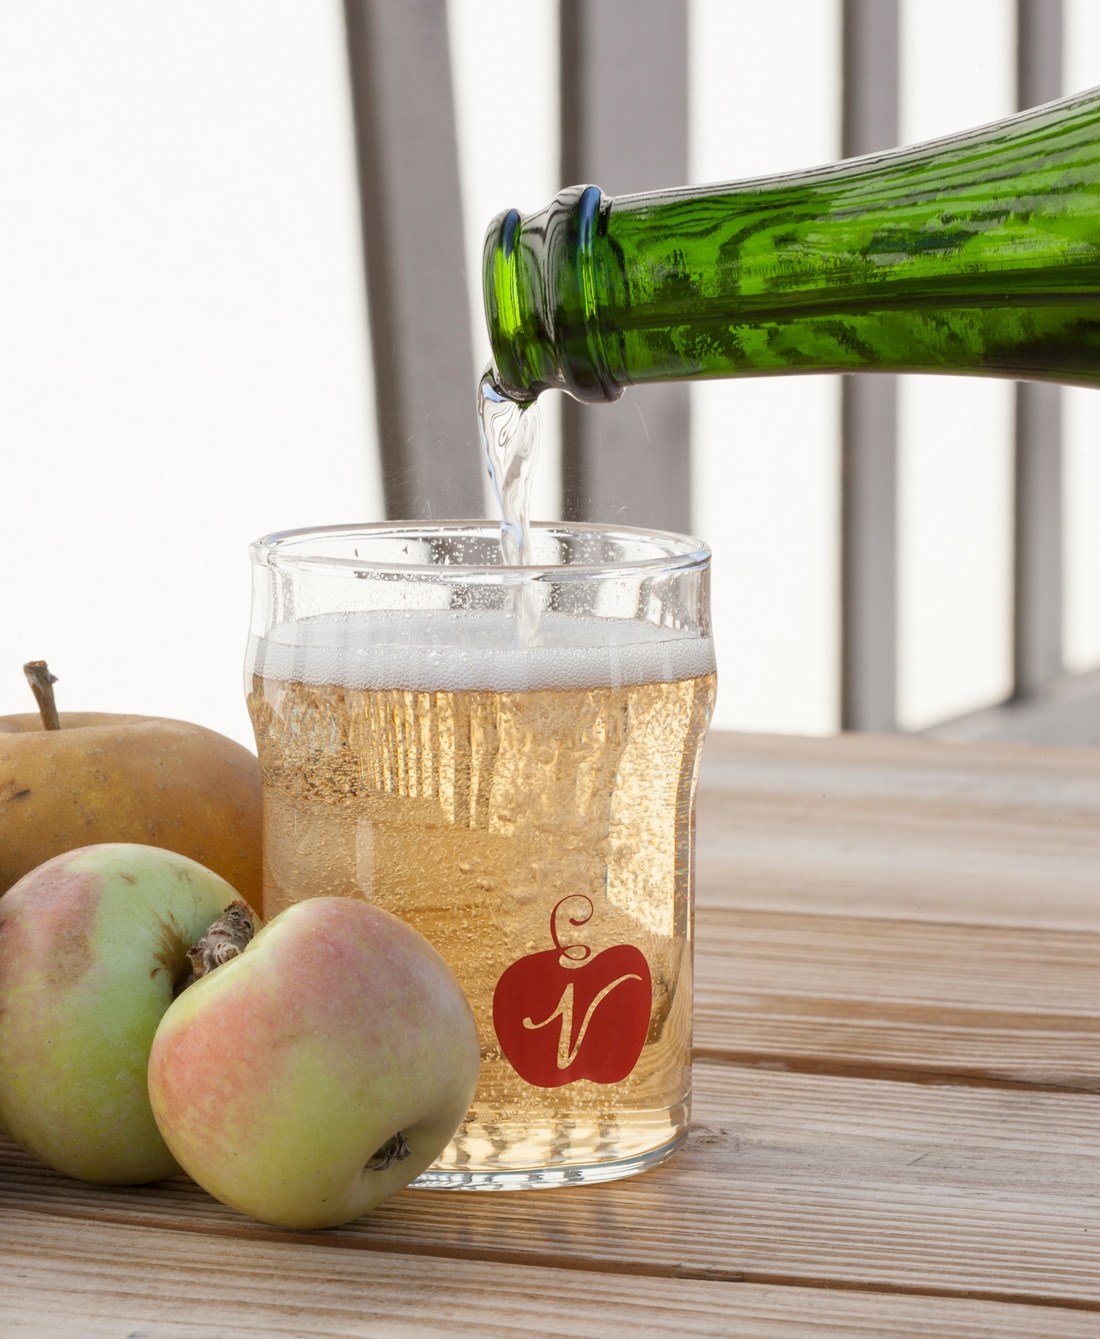 Meaderies and Cideries: Apples, Honey and Booze, Oh My!